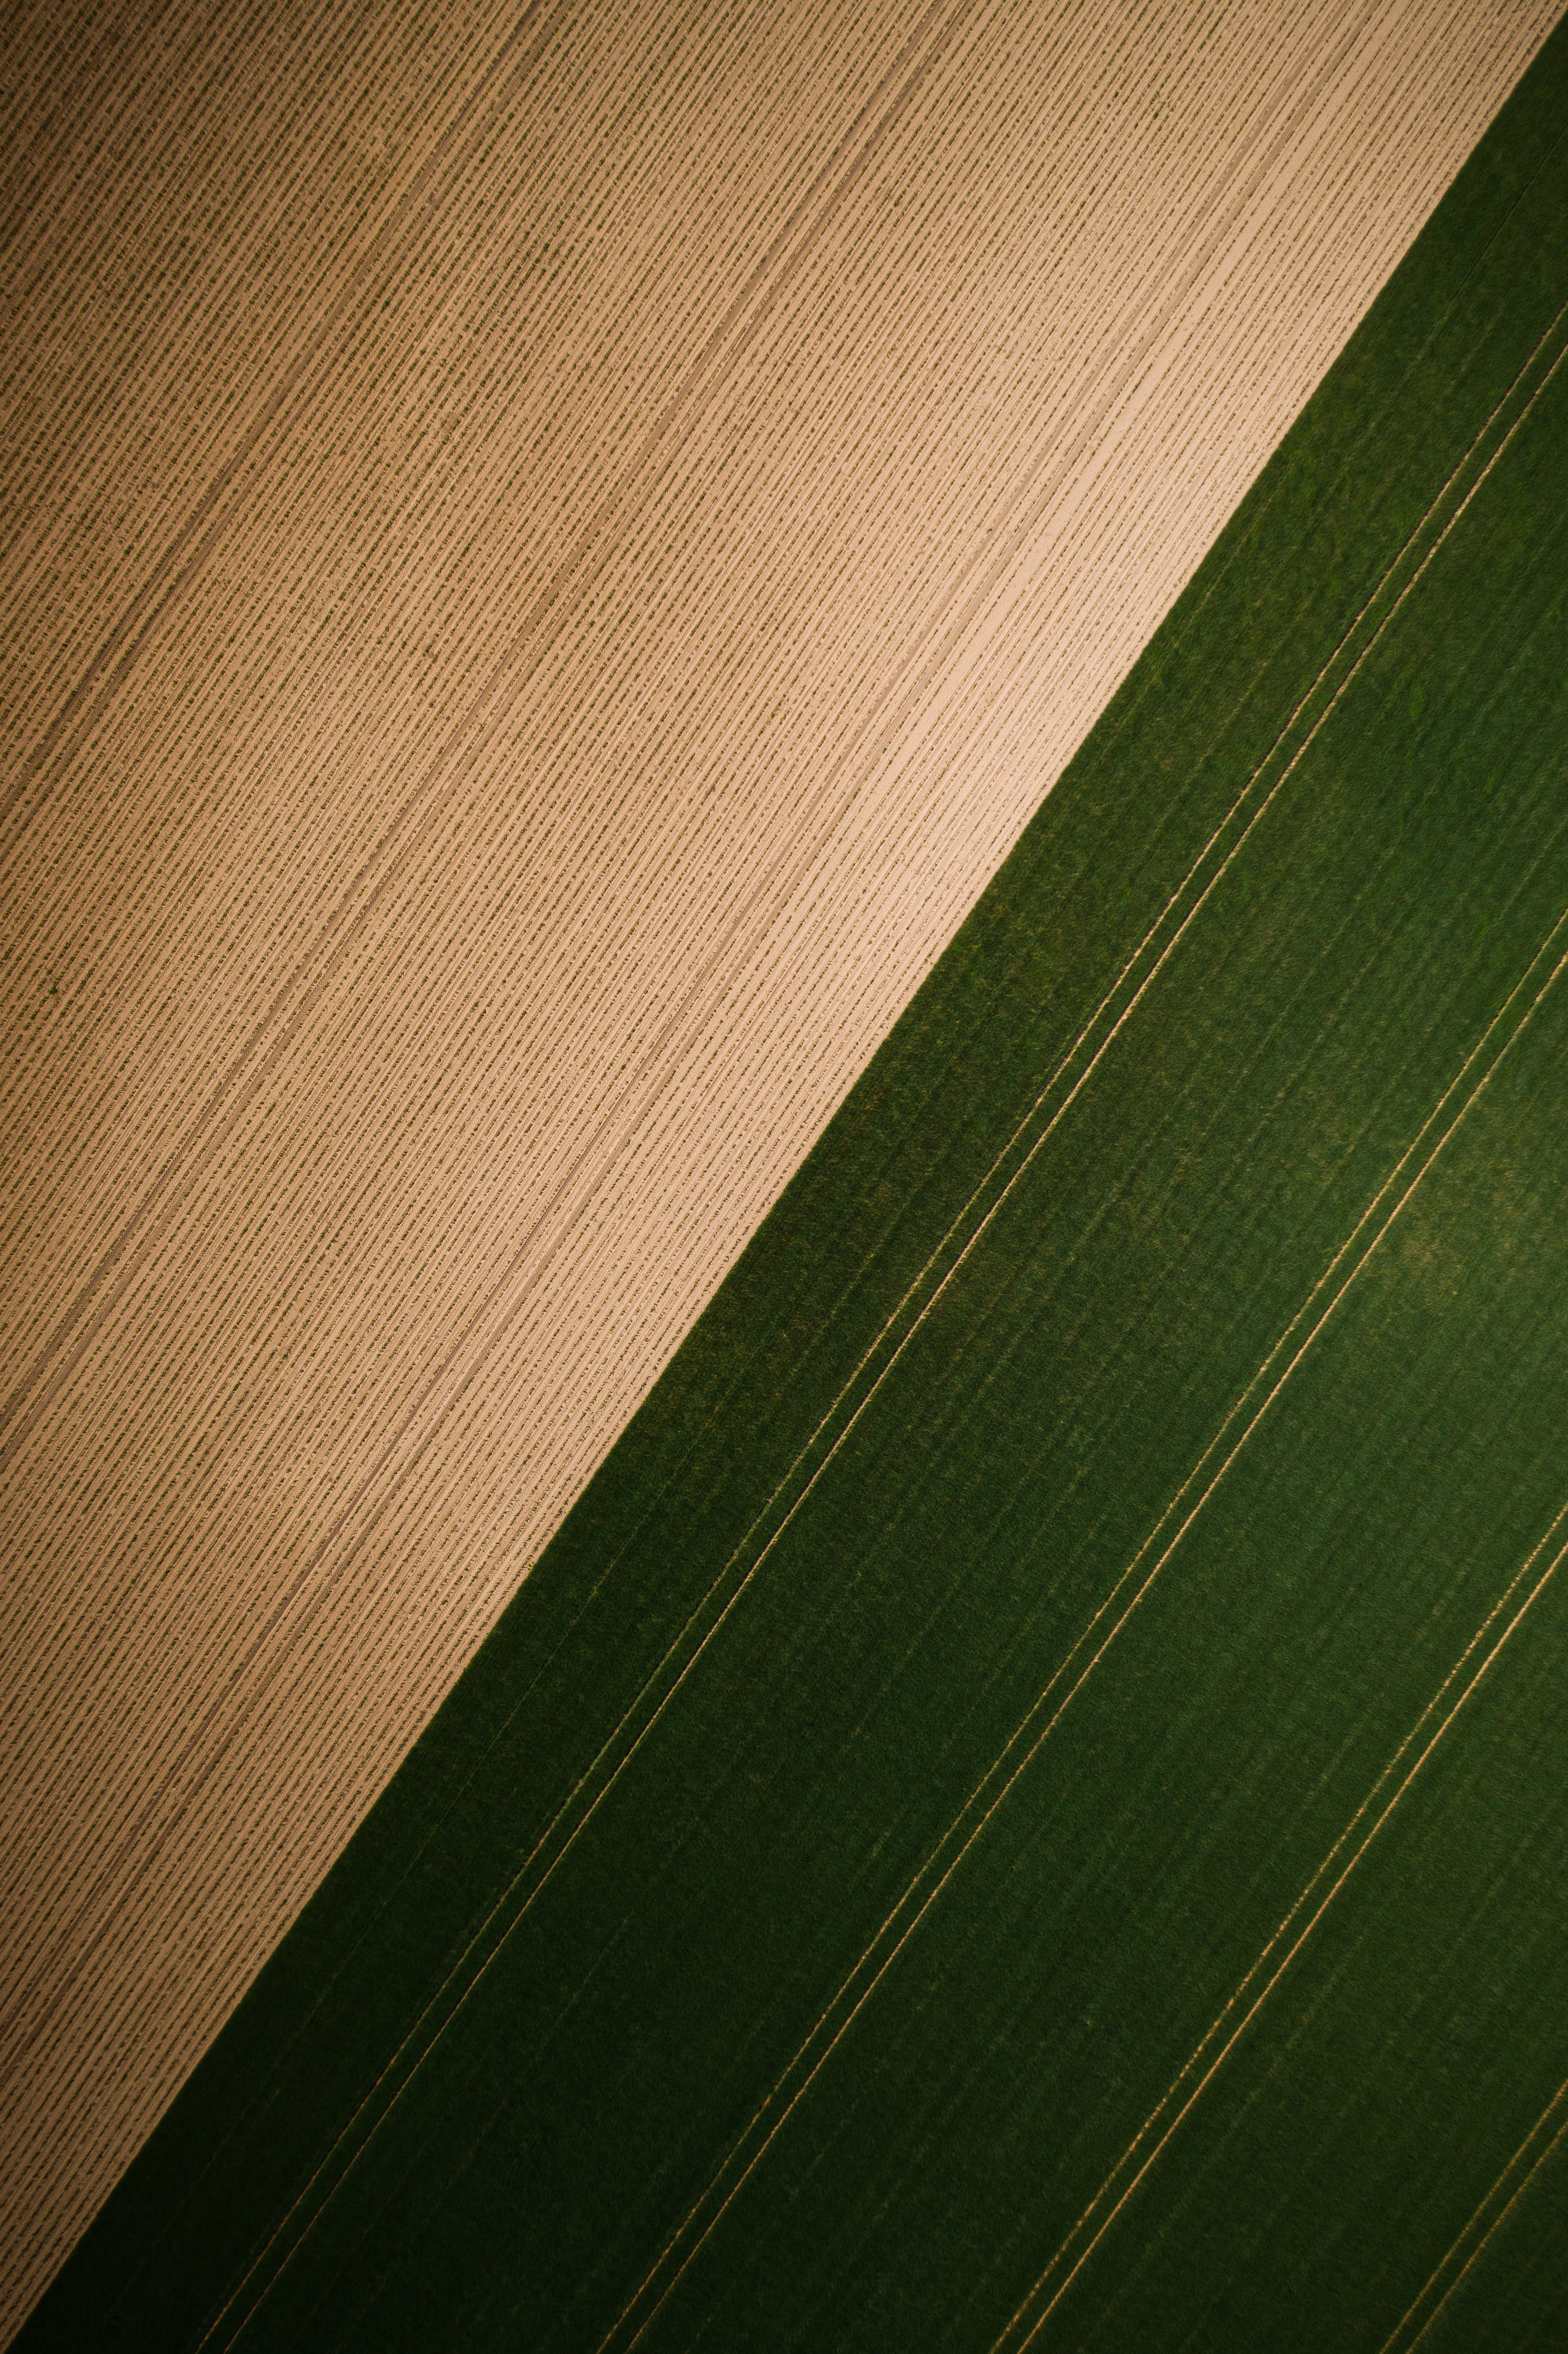 streaks, stripes, textures, grass, view from above, texture, field Phone Background